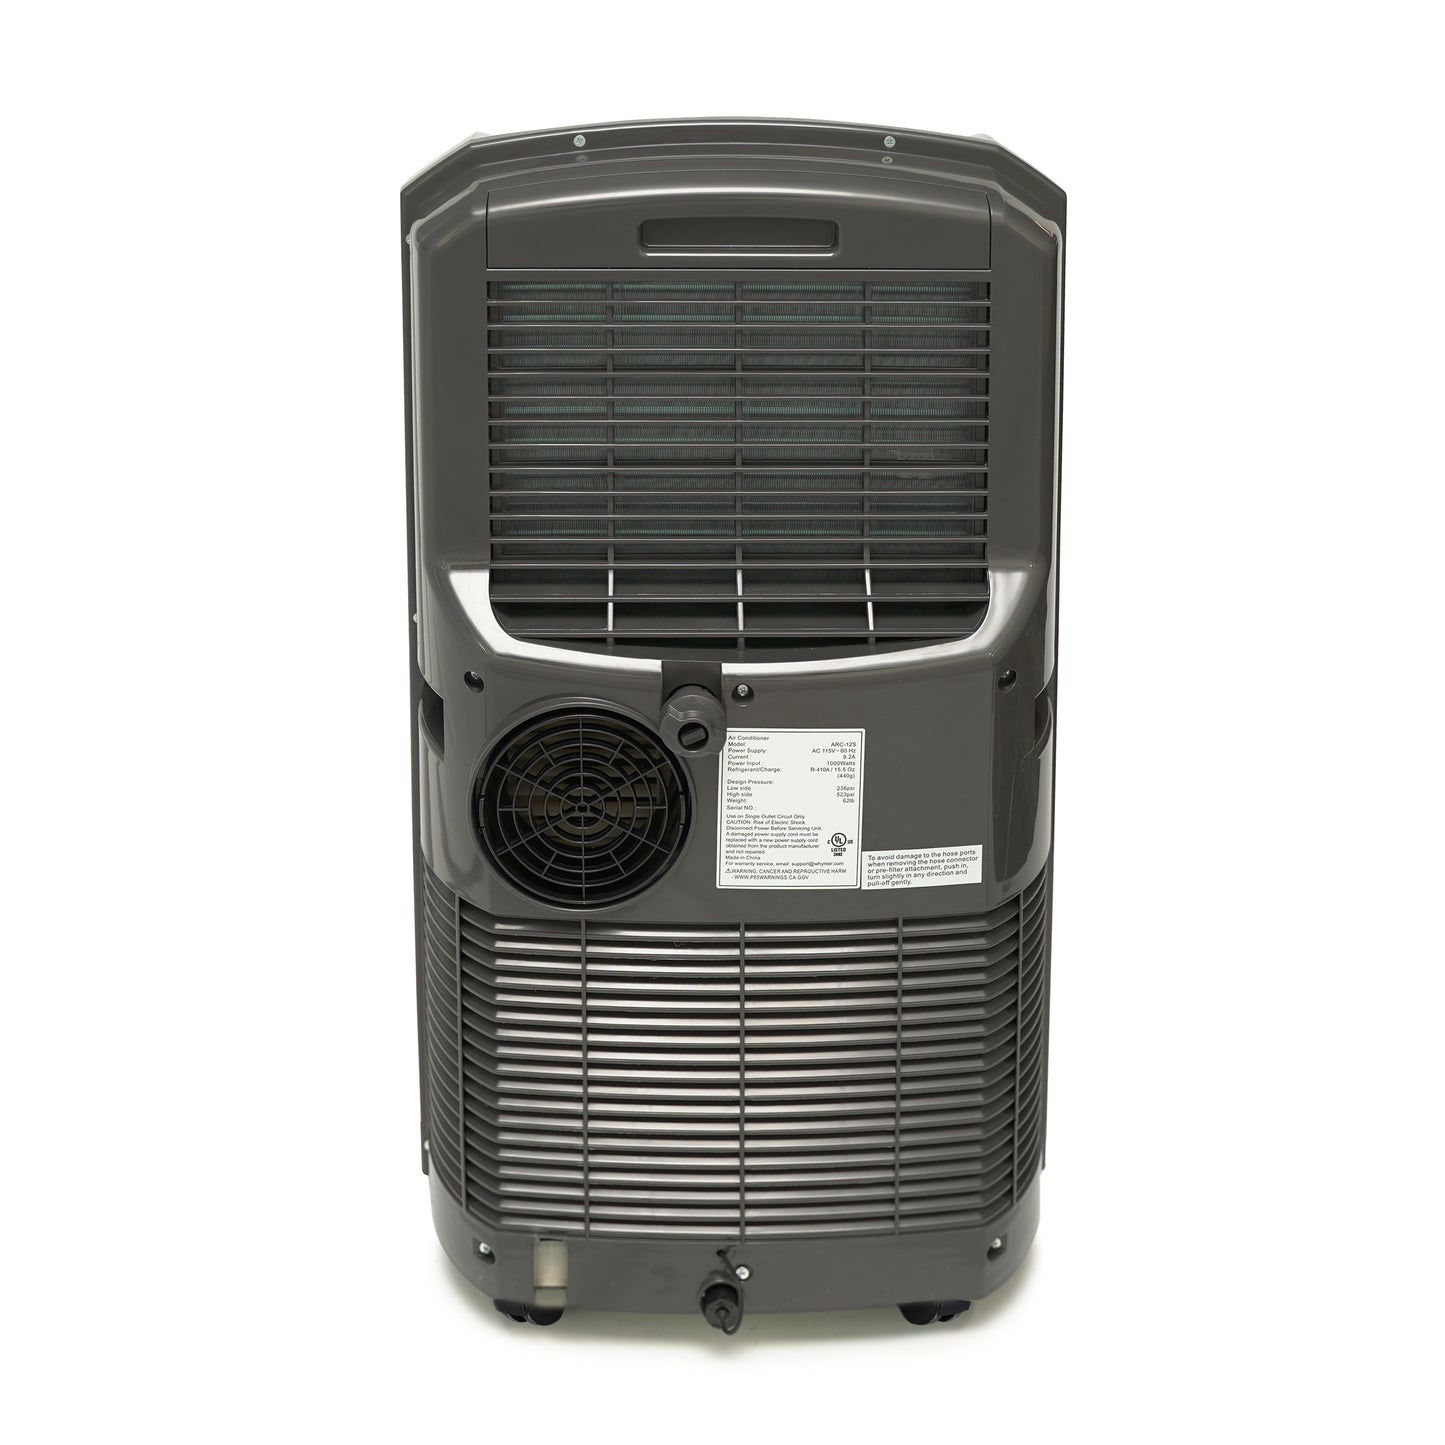 A grey rectangular device with a fan, the Whynter Eco-Friendly 12,000 BTU 400 sq ft Portable Air Conditioner with Activated Carbon Filter.